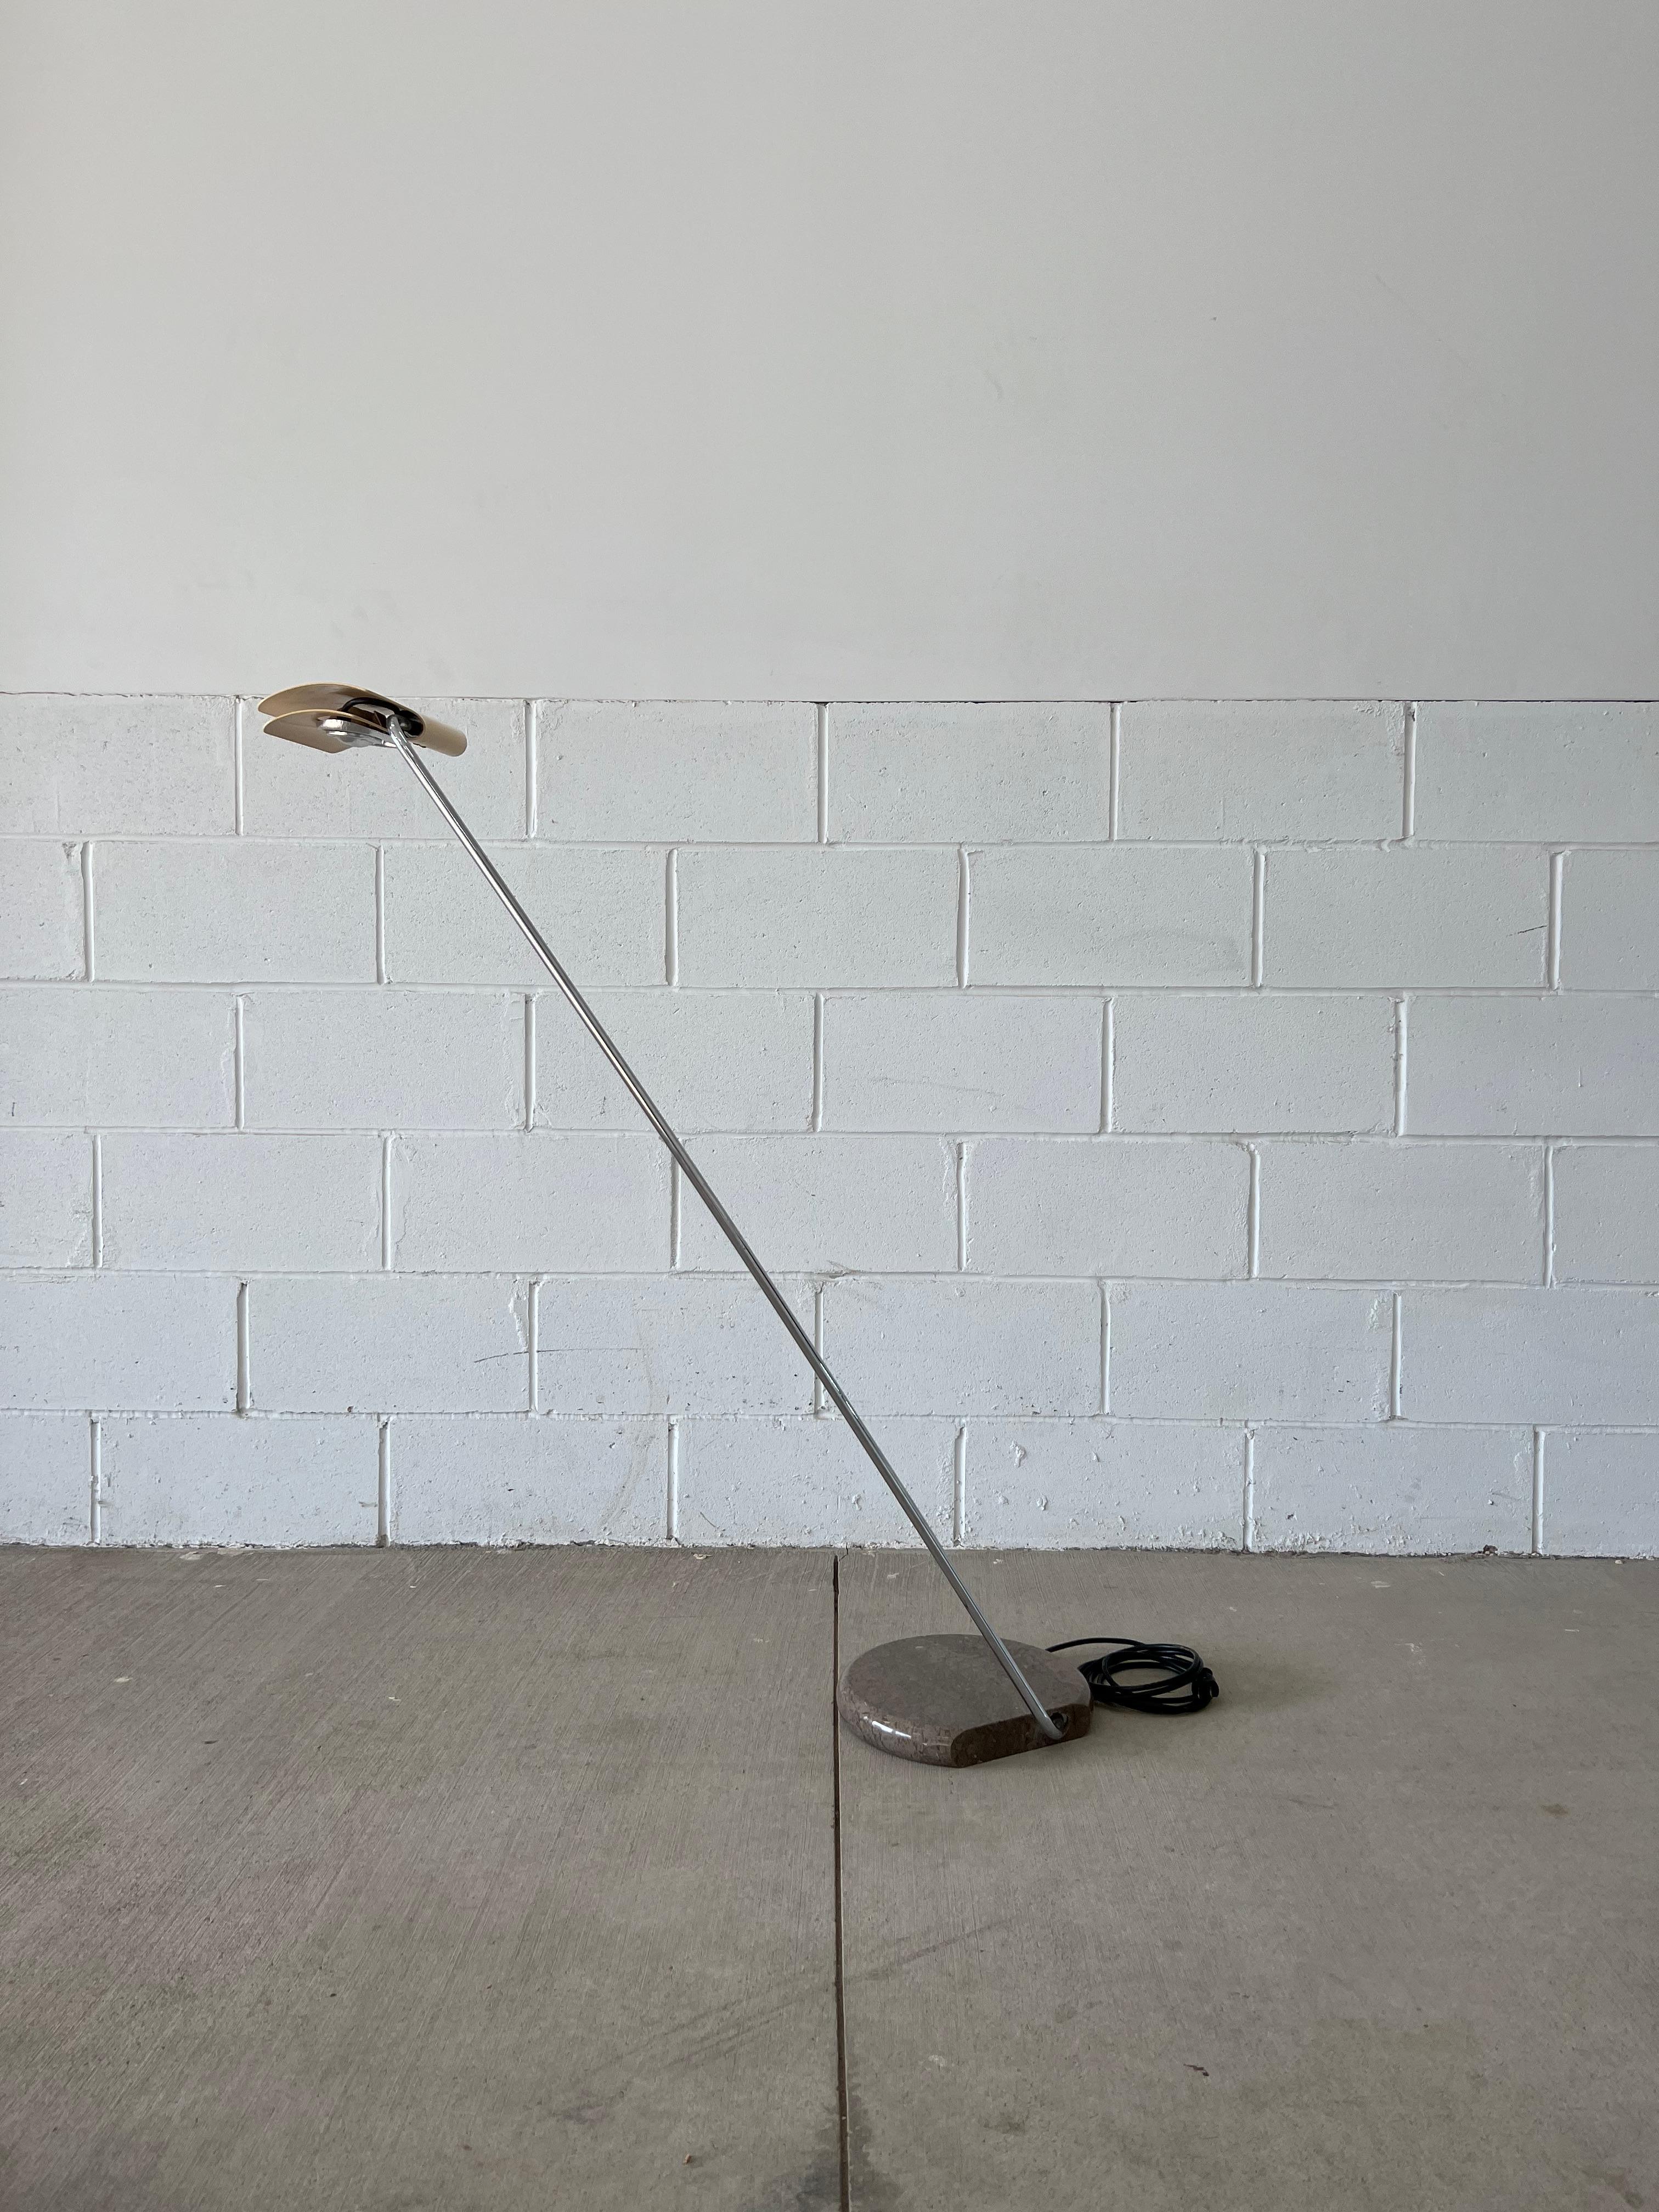 Tegola floor lamp by Bruno Gecchelin for Skipper (unmarked) with cream shade and solid marble base. Dimmer switch controls the e11 bulb from dim to bright.